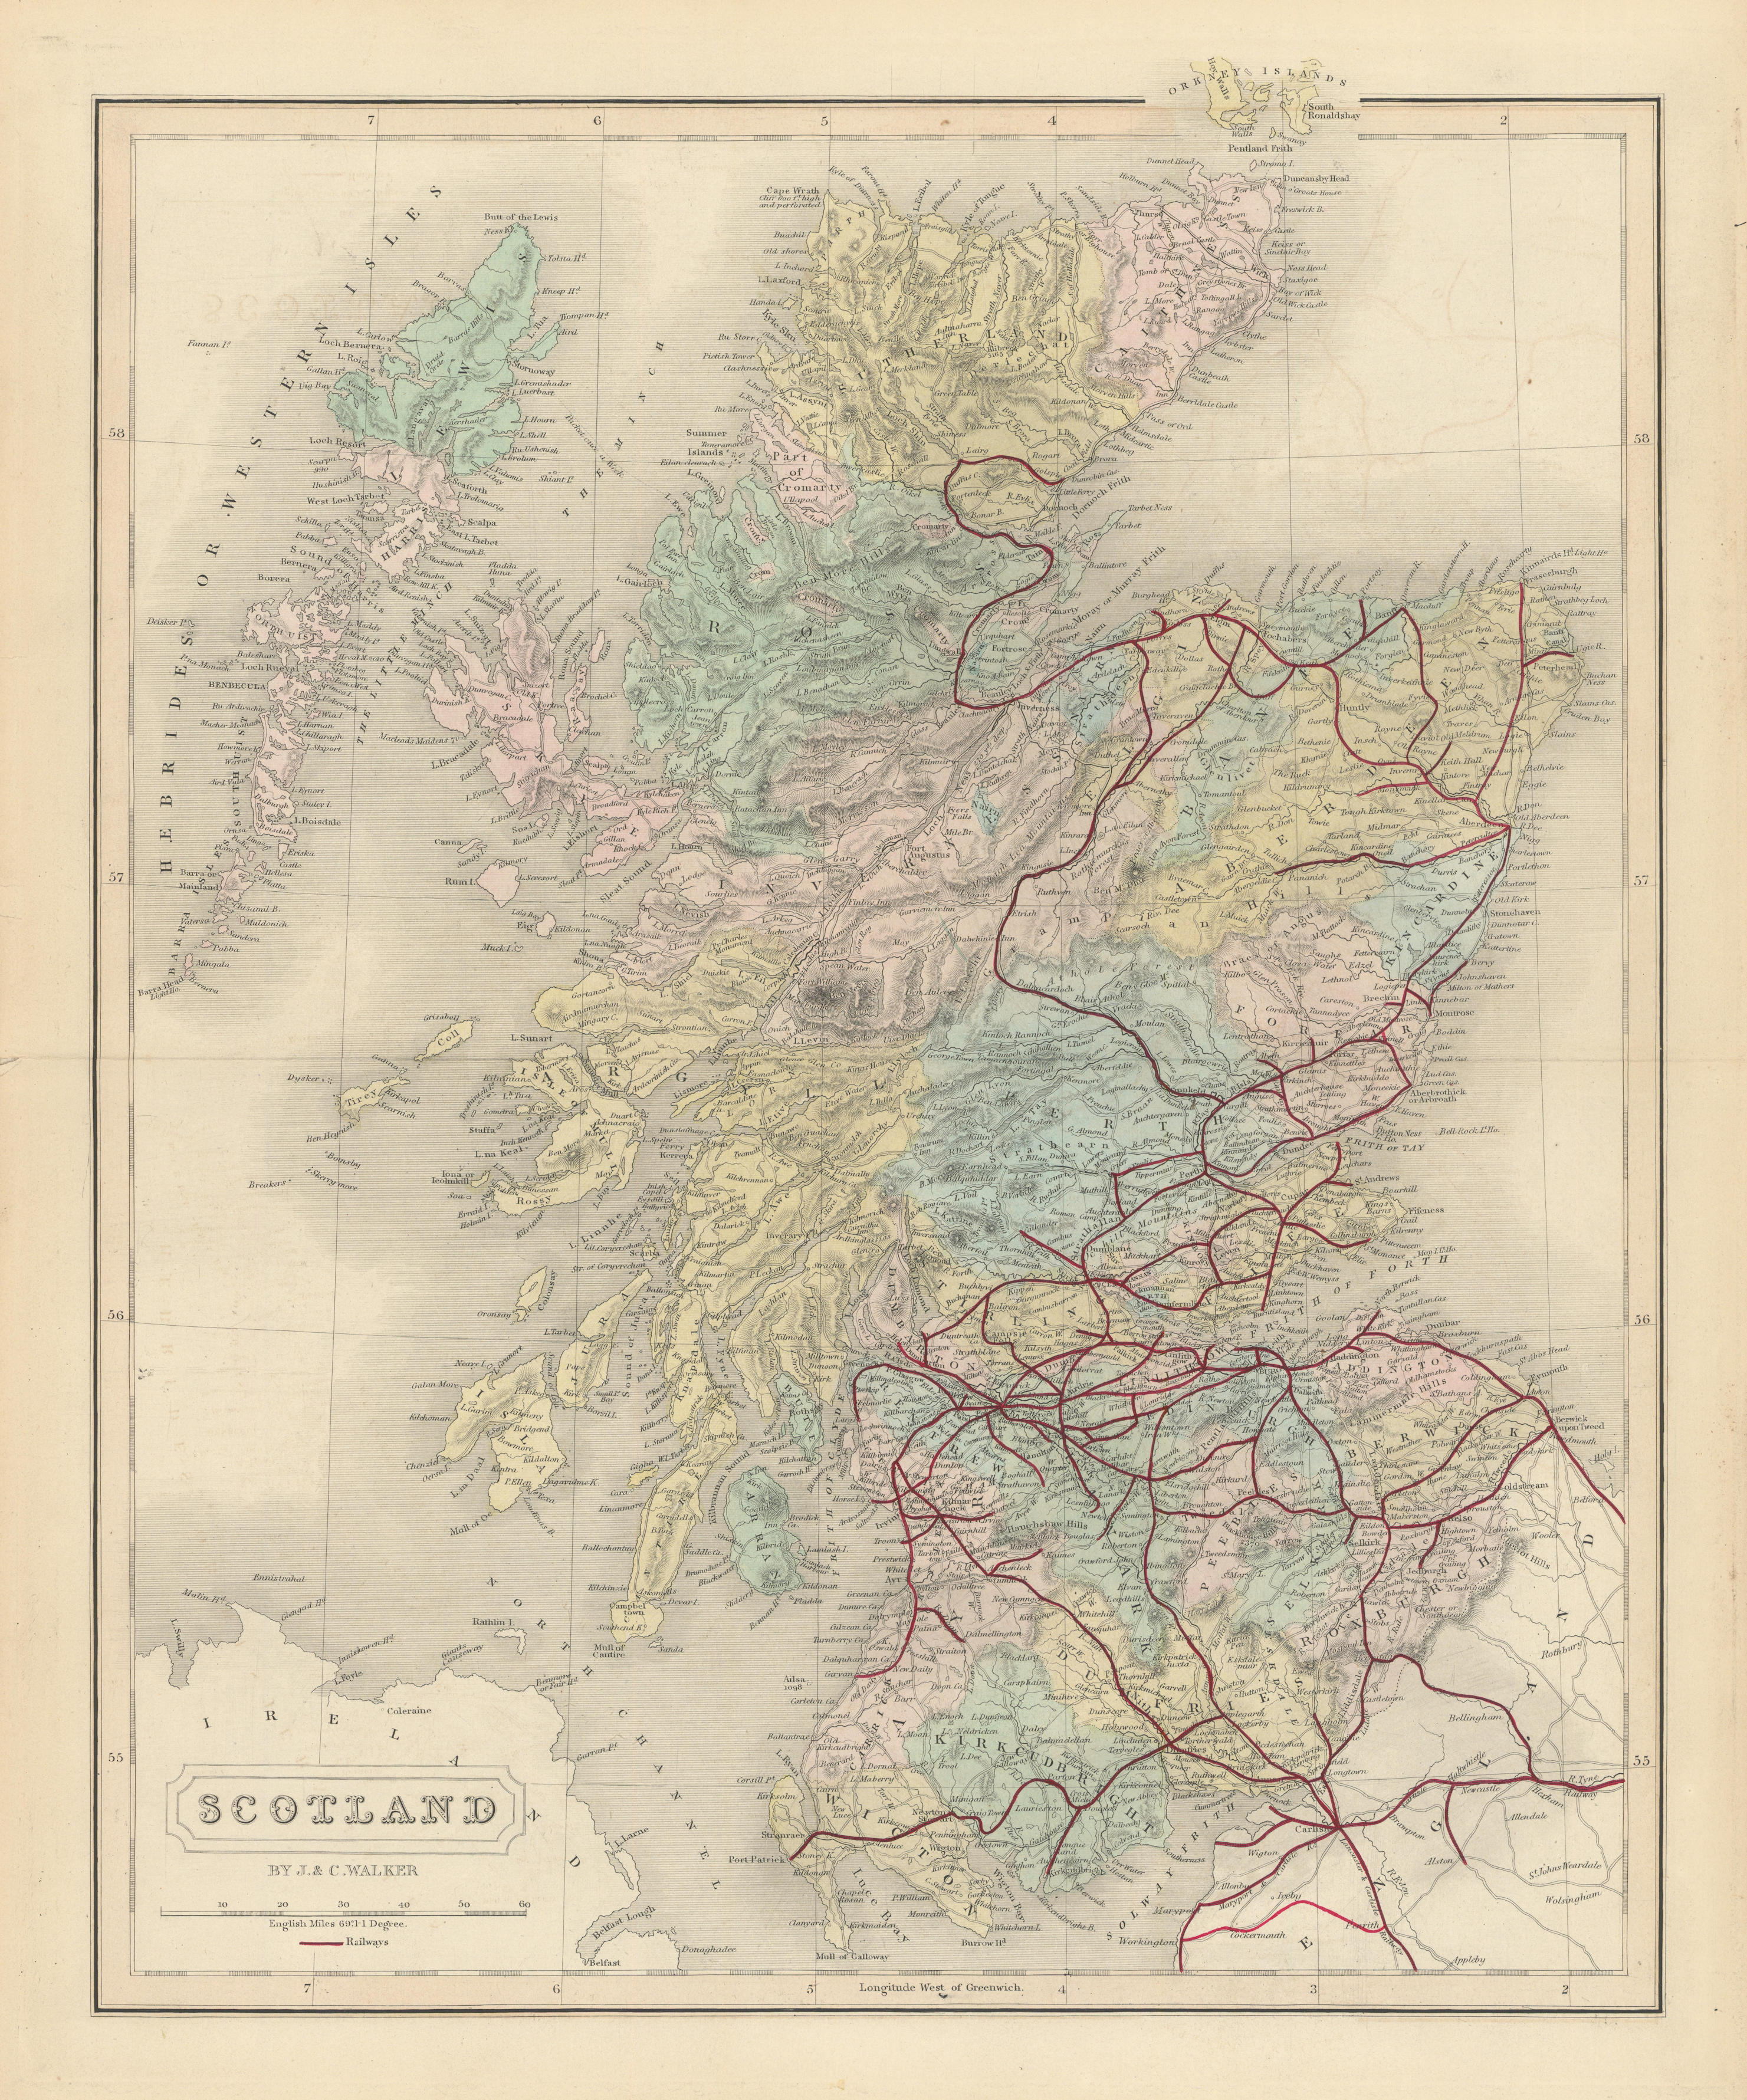 Associate Product Scotland antique map by J & C Walker. Railways & counties 1870 old